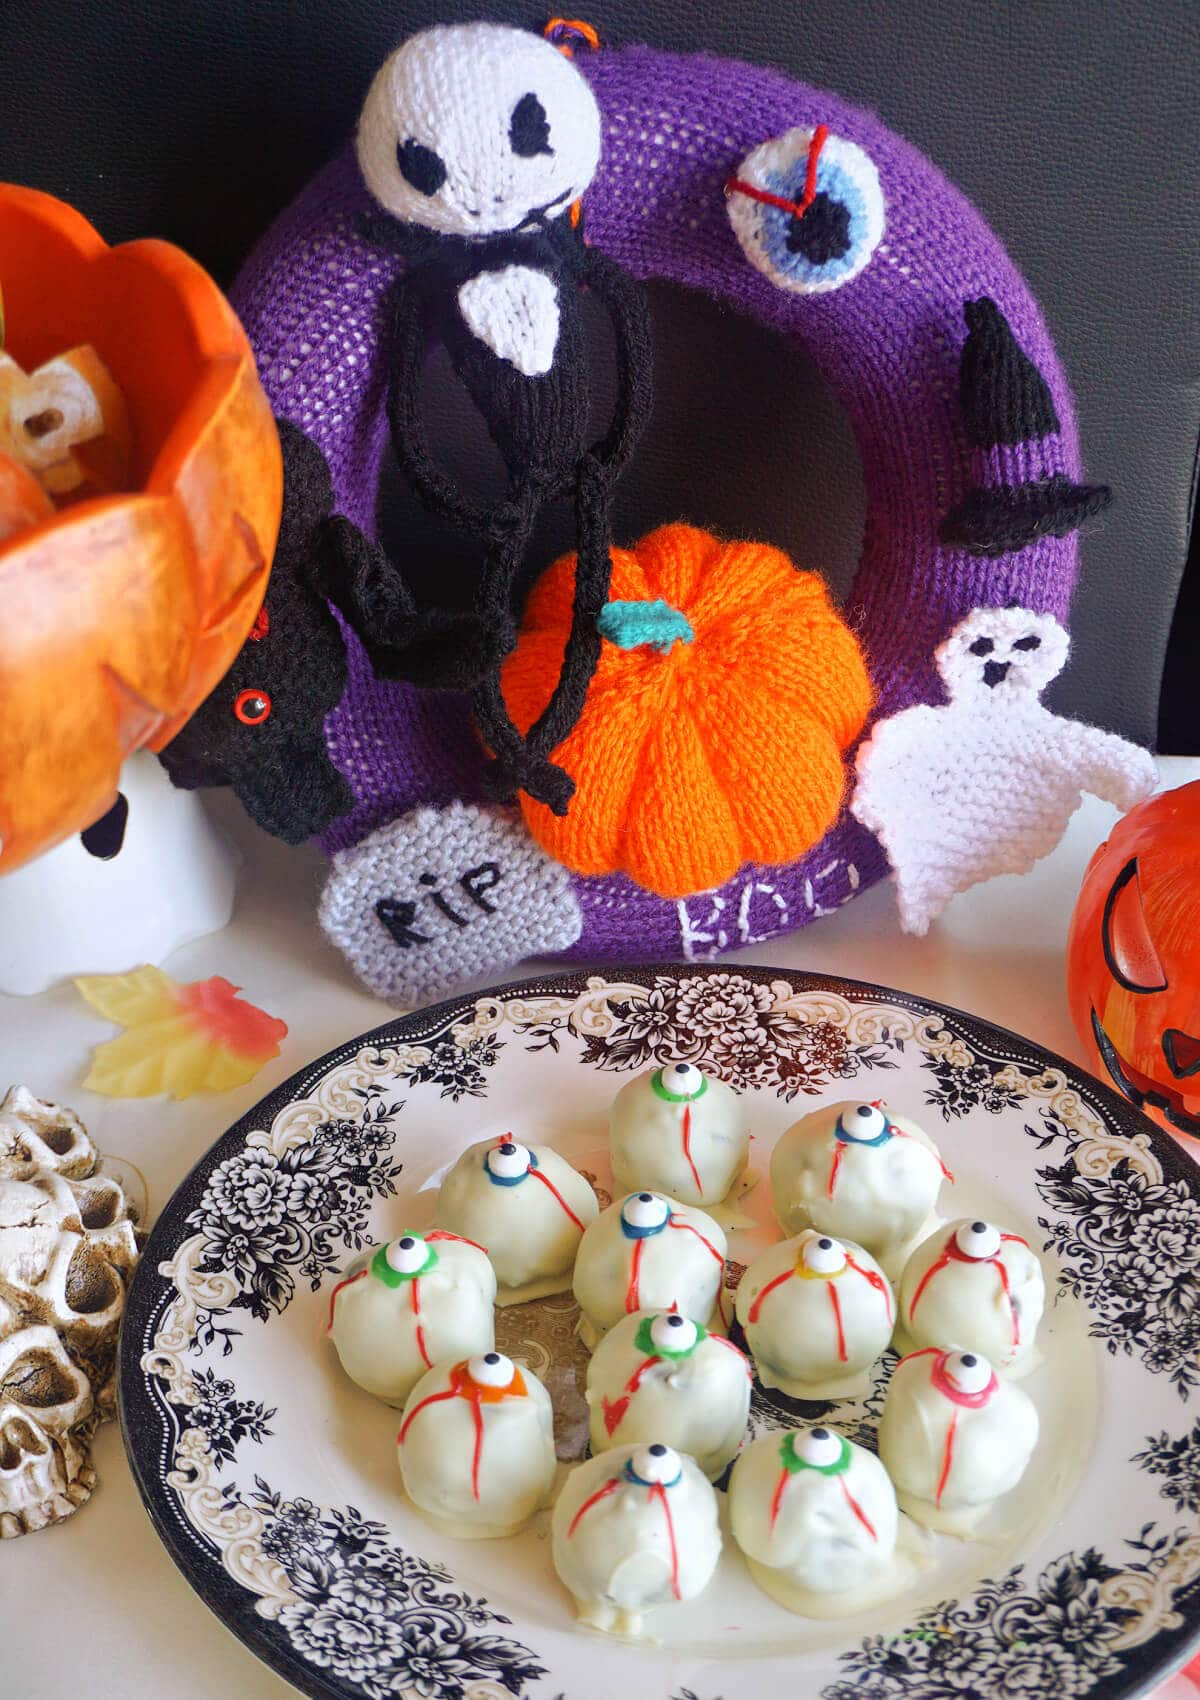 A plate with eyeball truffles surrounded by Halloween decorations.